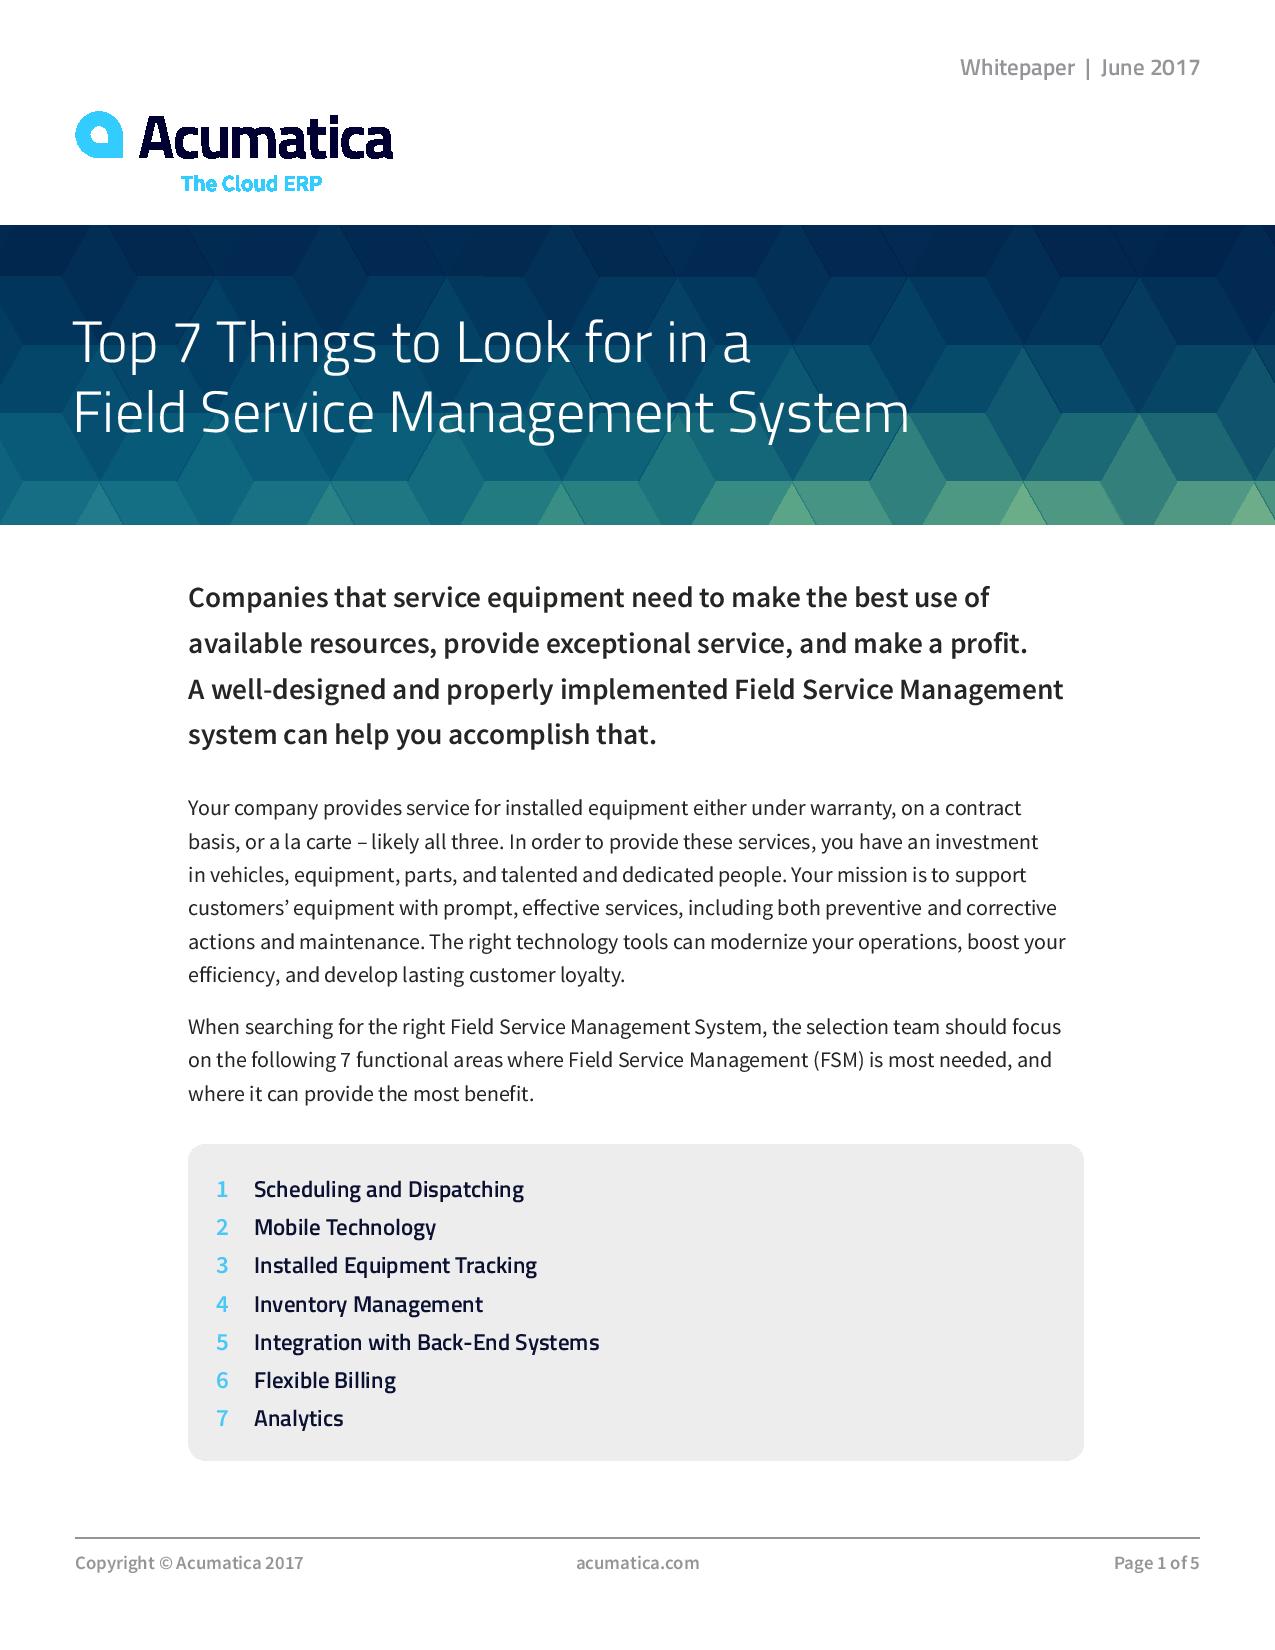 Top 7 Things to Look For in a Field Service Management System, page 0